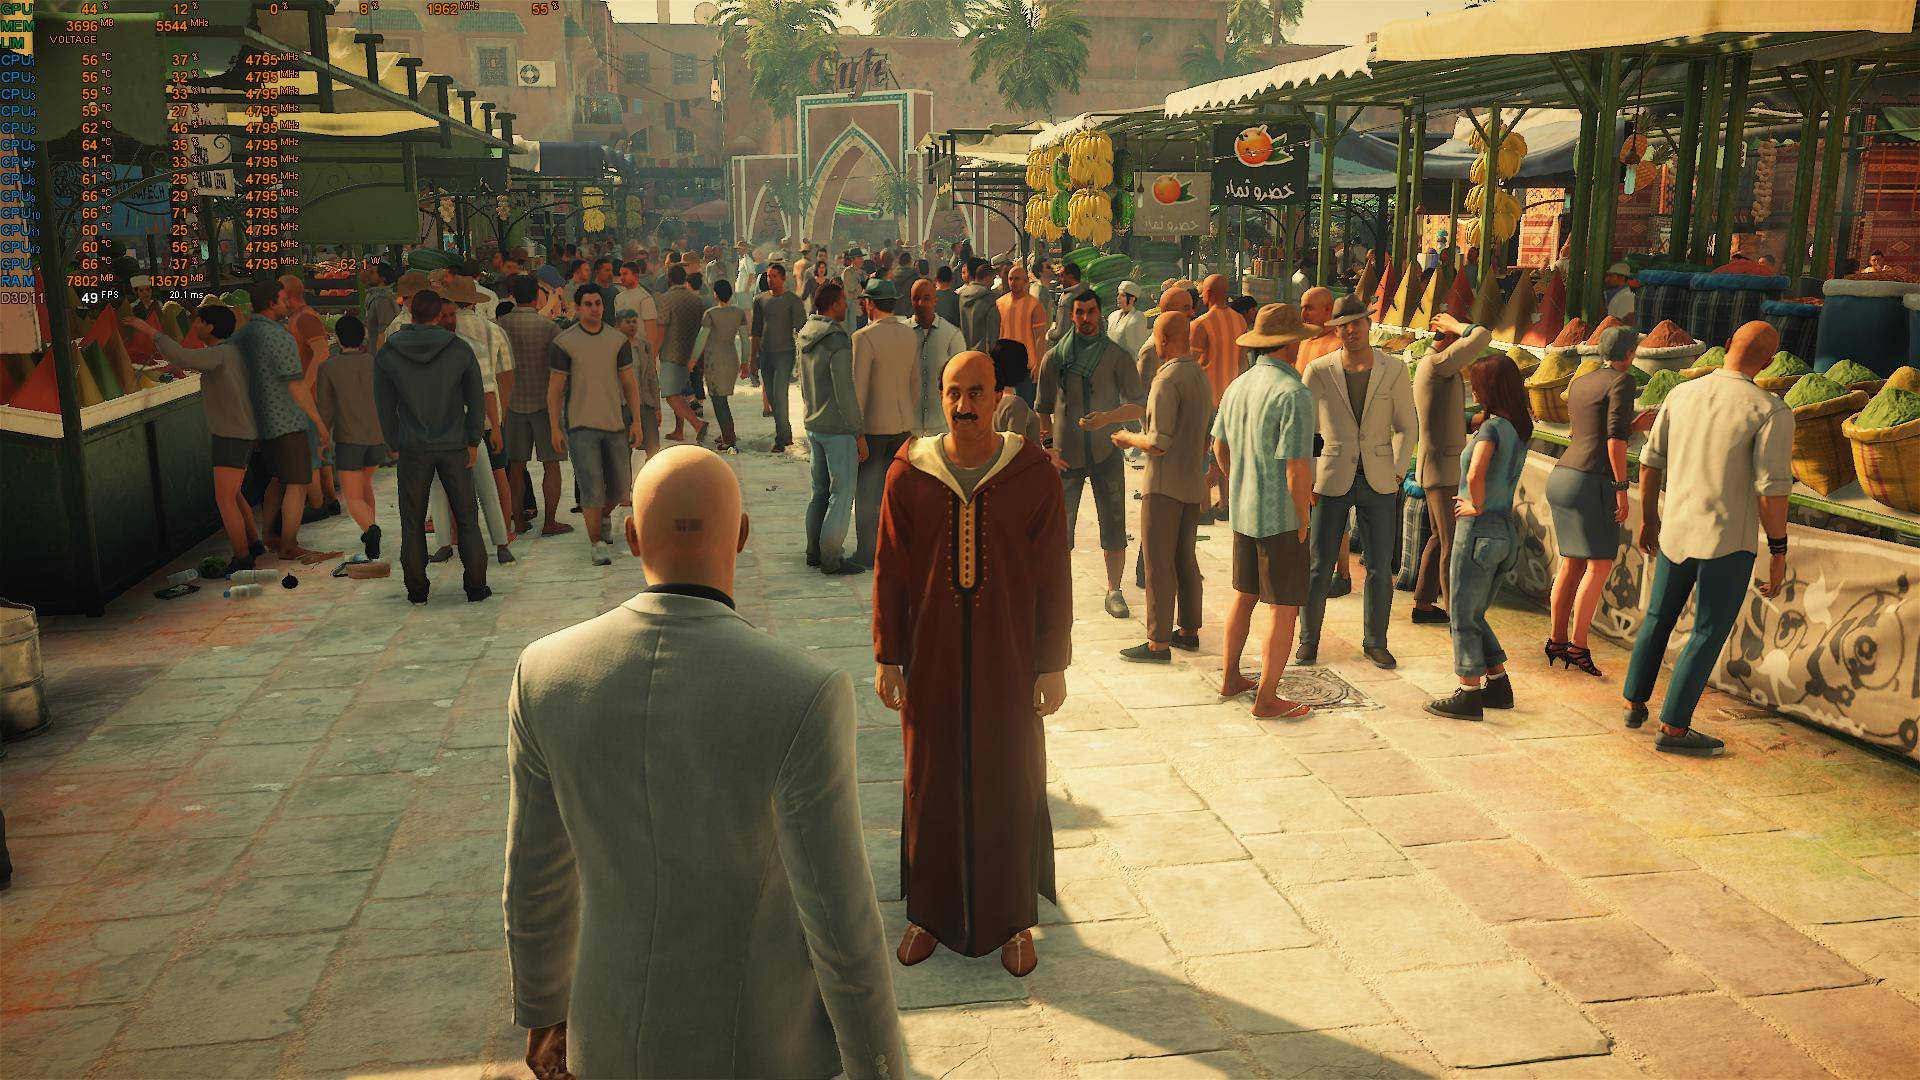 Agent 47 Poised In Bold Stance In An Exotic Tropical Setting Of Hitman 2. Background